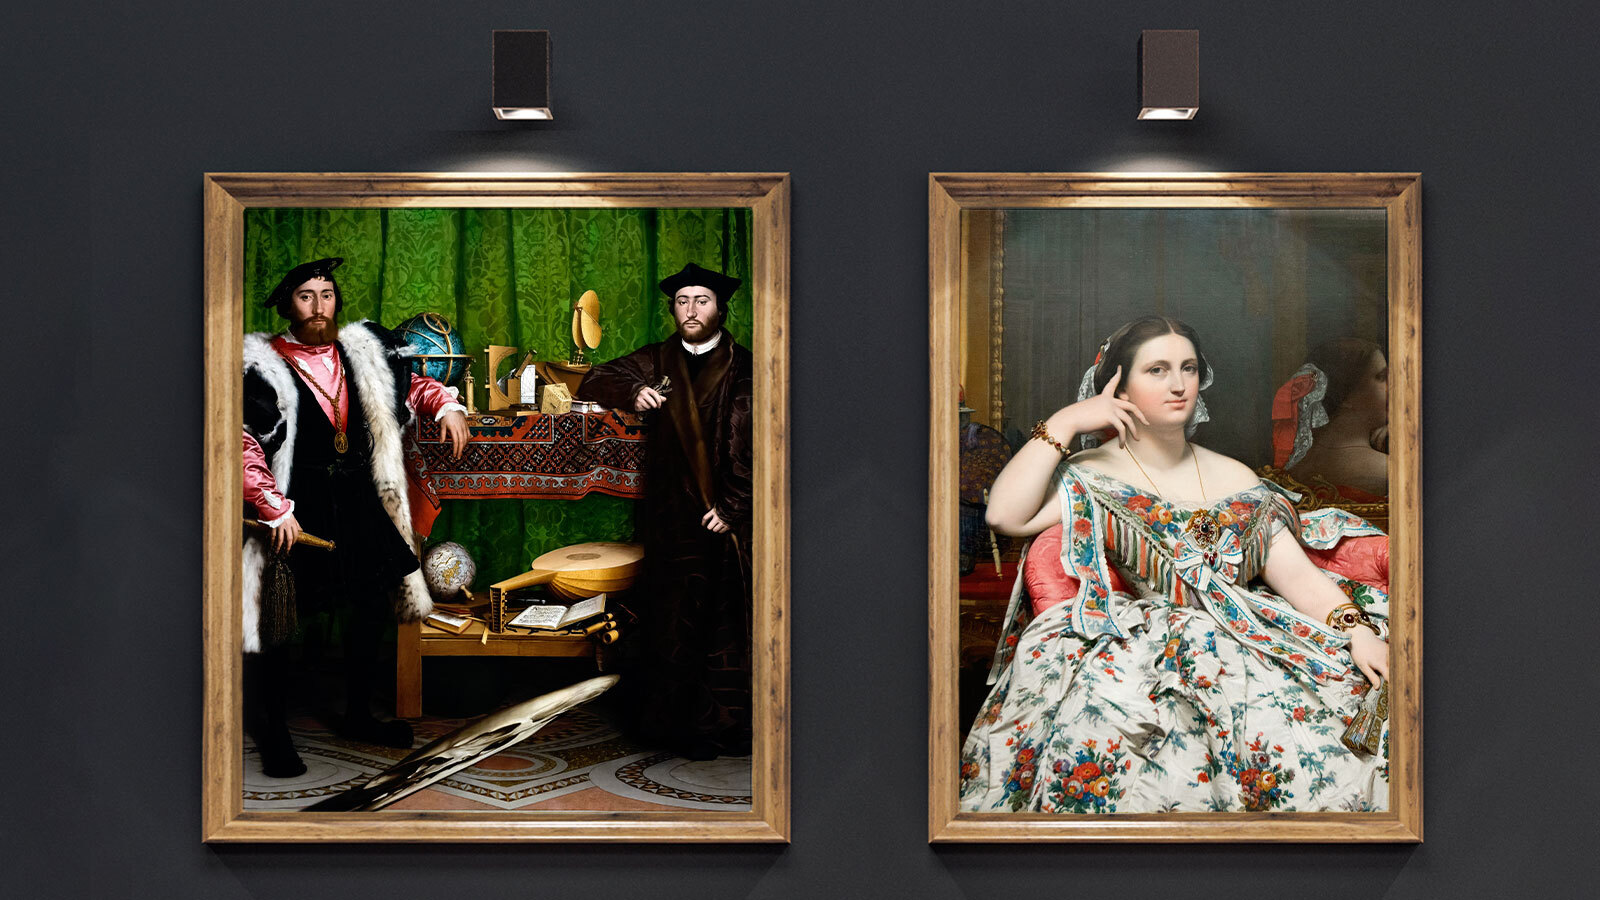 From left: The Ambassadors by Holbein and Madame Moitessier by Ingres